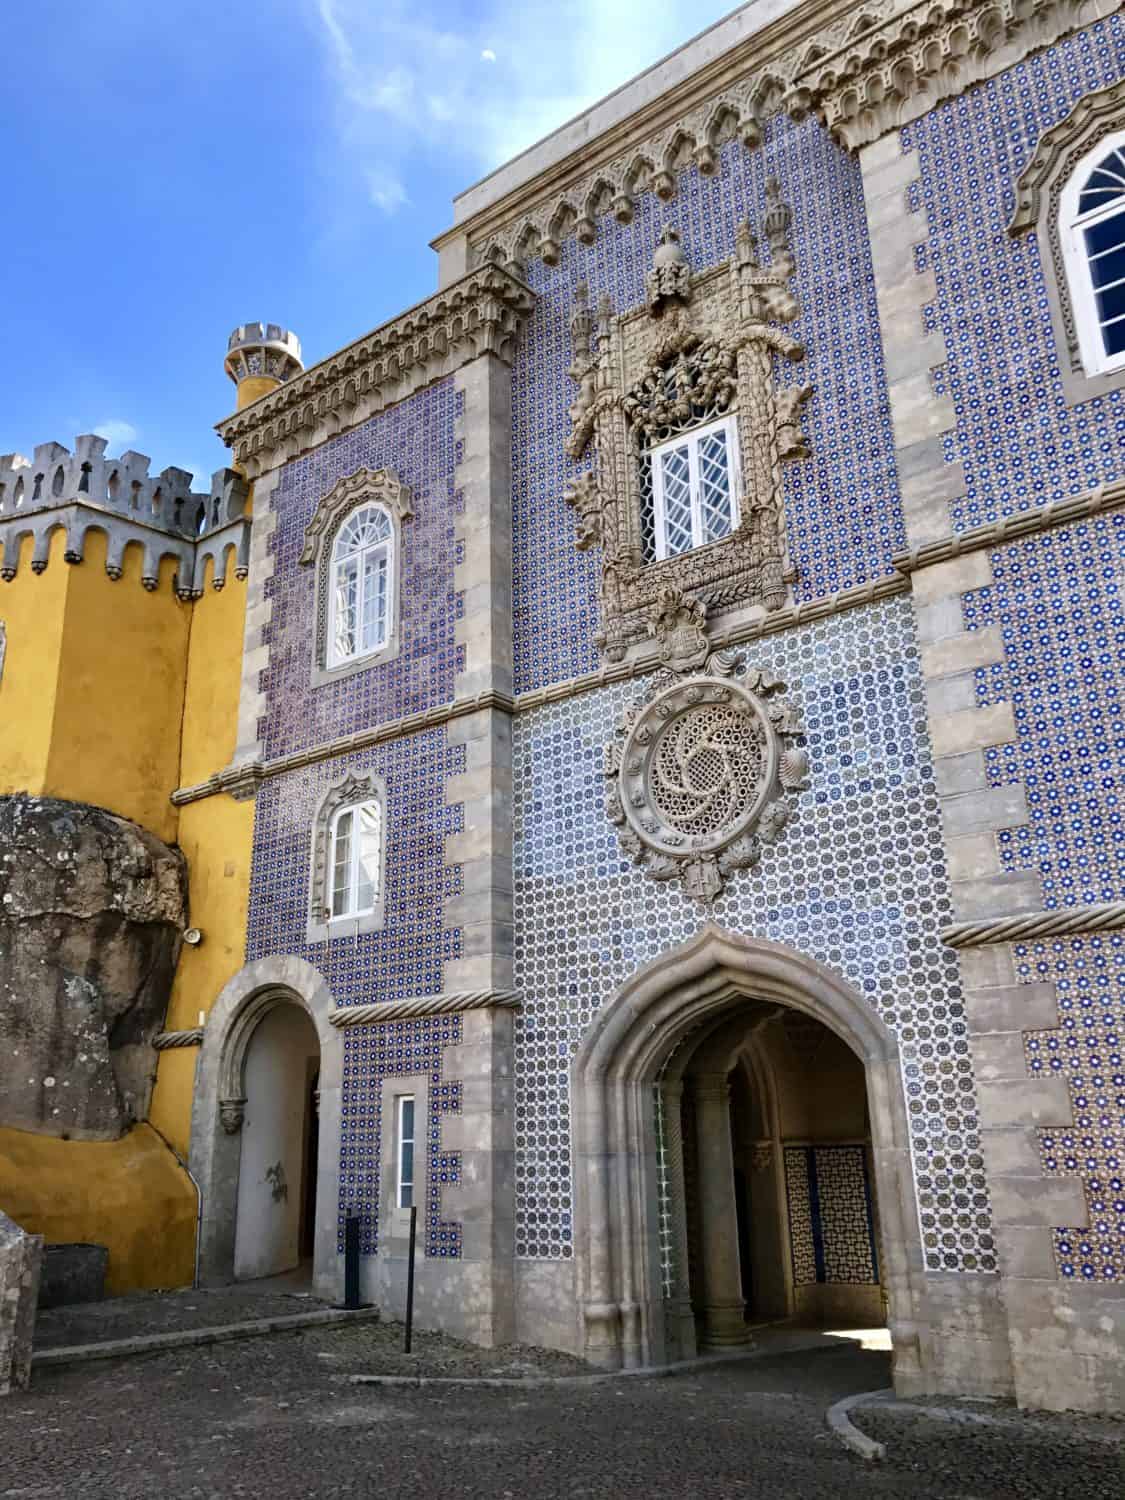 Gorgeous Pena Palace | A guide to visiting magical Sintra, Portugal, a perfect guide for any first-timer | What to do in Sintra, which castles to visit, how to plan your trip | Sintra is the perfect day trip from Lisbon, but you could easily spend a few days exploring all the amazing history! #sintra #portugal